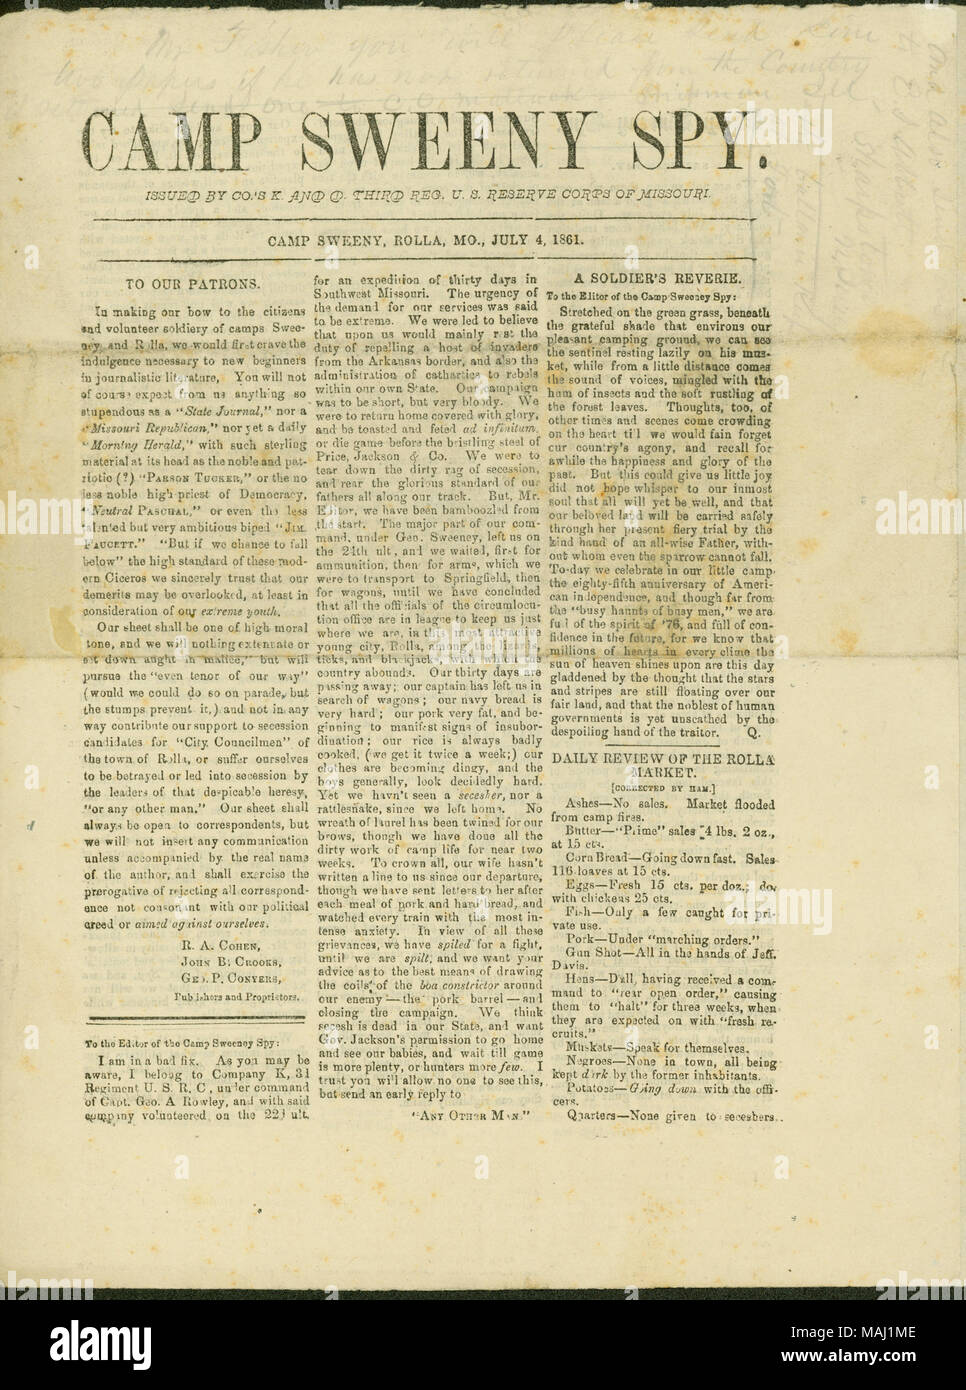 Includes a letter to the patrons of the newspaper, letters to the editor, local news, commentary on the Fourth of July, a poem, General Orders from D. Bayles, and a list of men who have taken a loyalty oath to the United States. Title: Newspaper issue of Camp Sweeney Spy, issued by Companies D and K, 3rd U.S.R.C. (3 months), July 4, 1861  . 4 July 1861. Camp Sweeney Spy Stock Photo